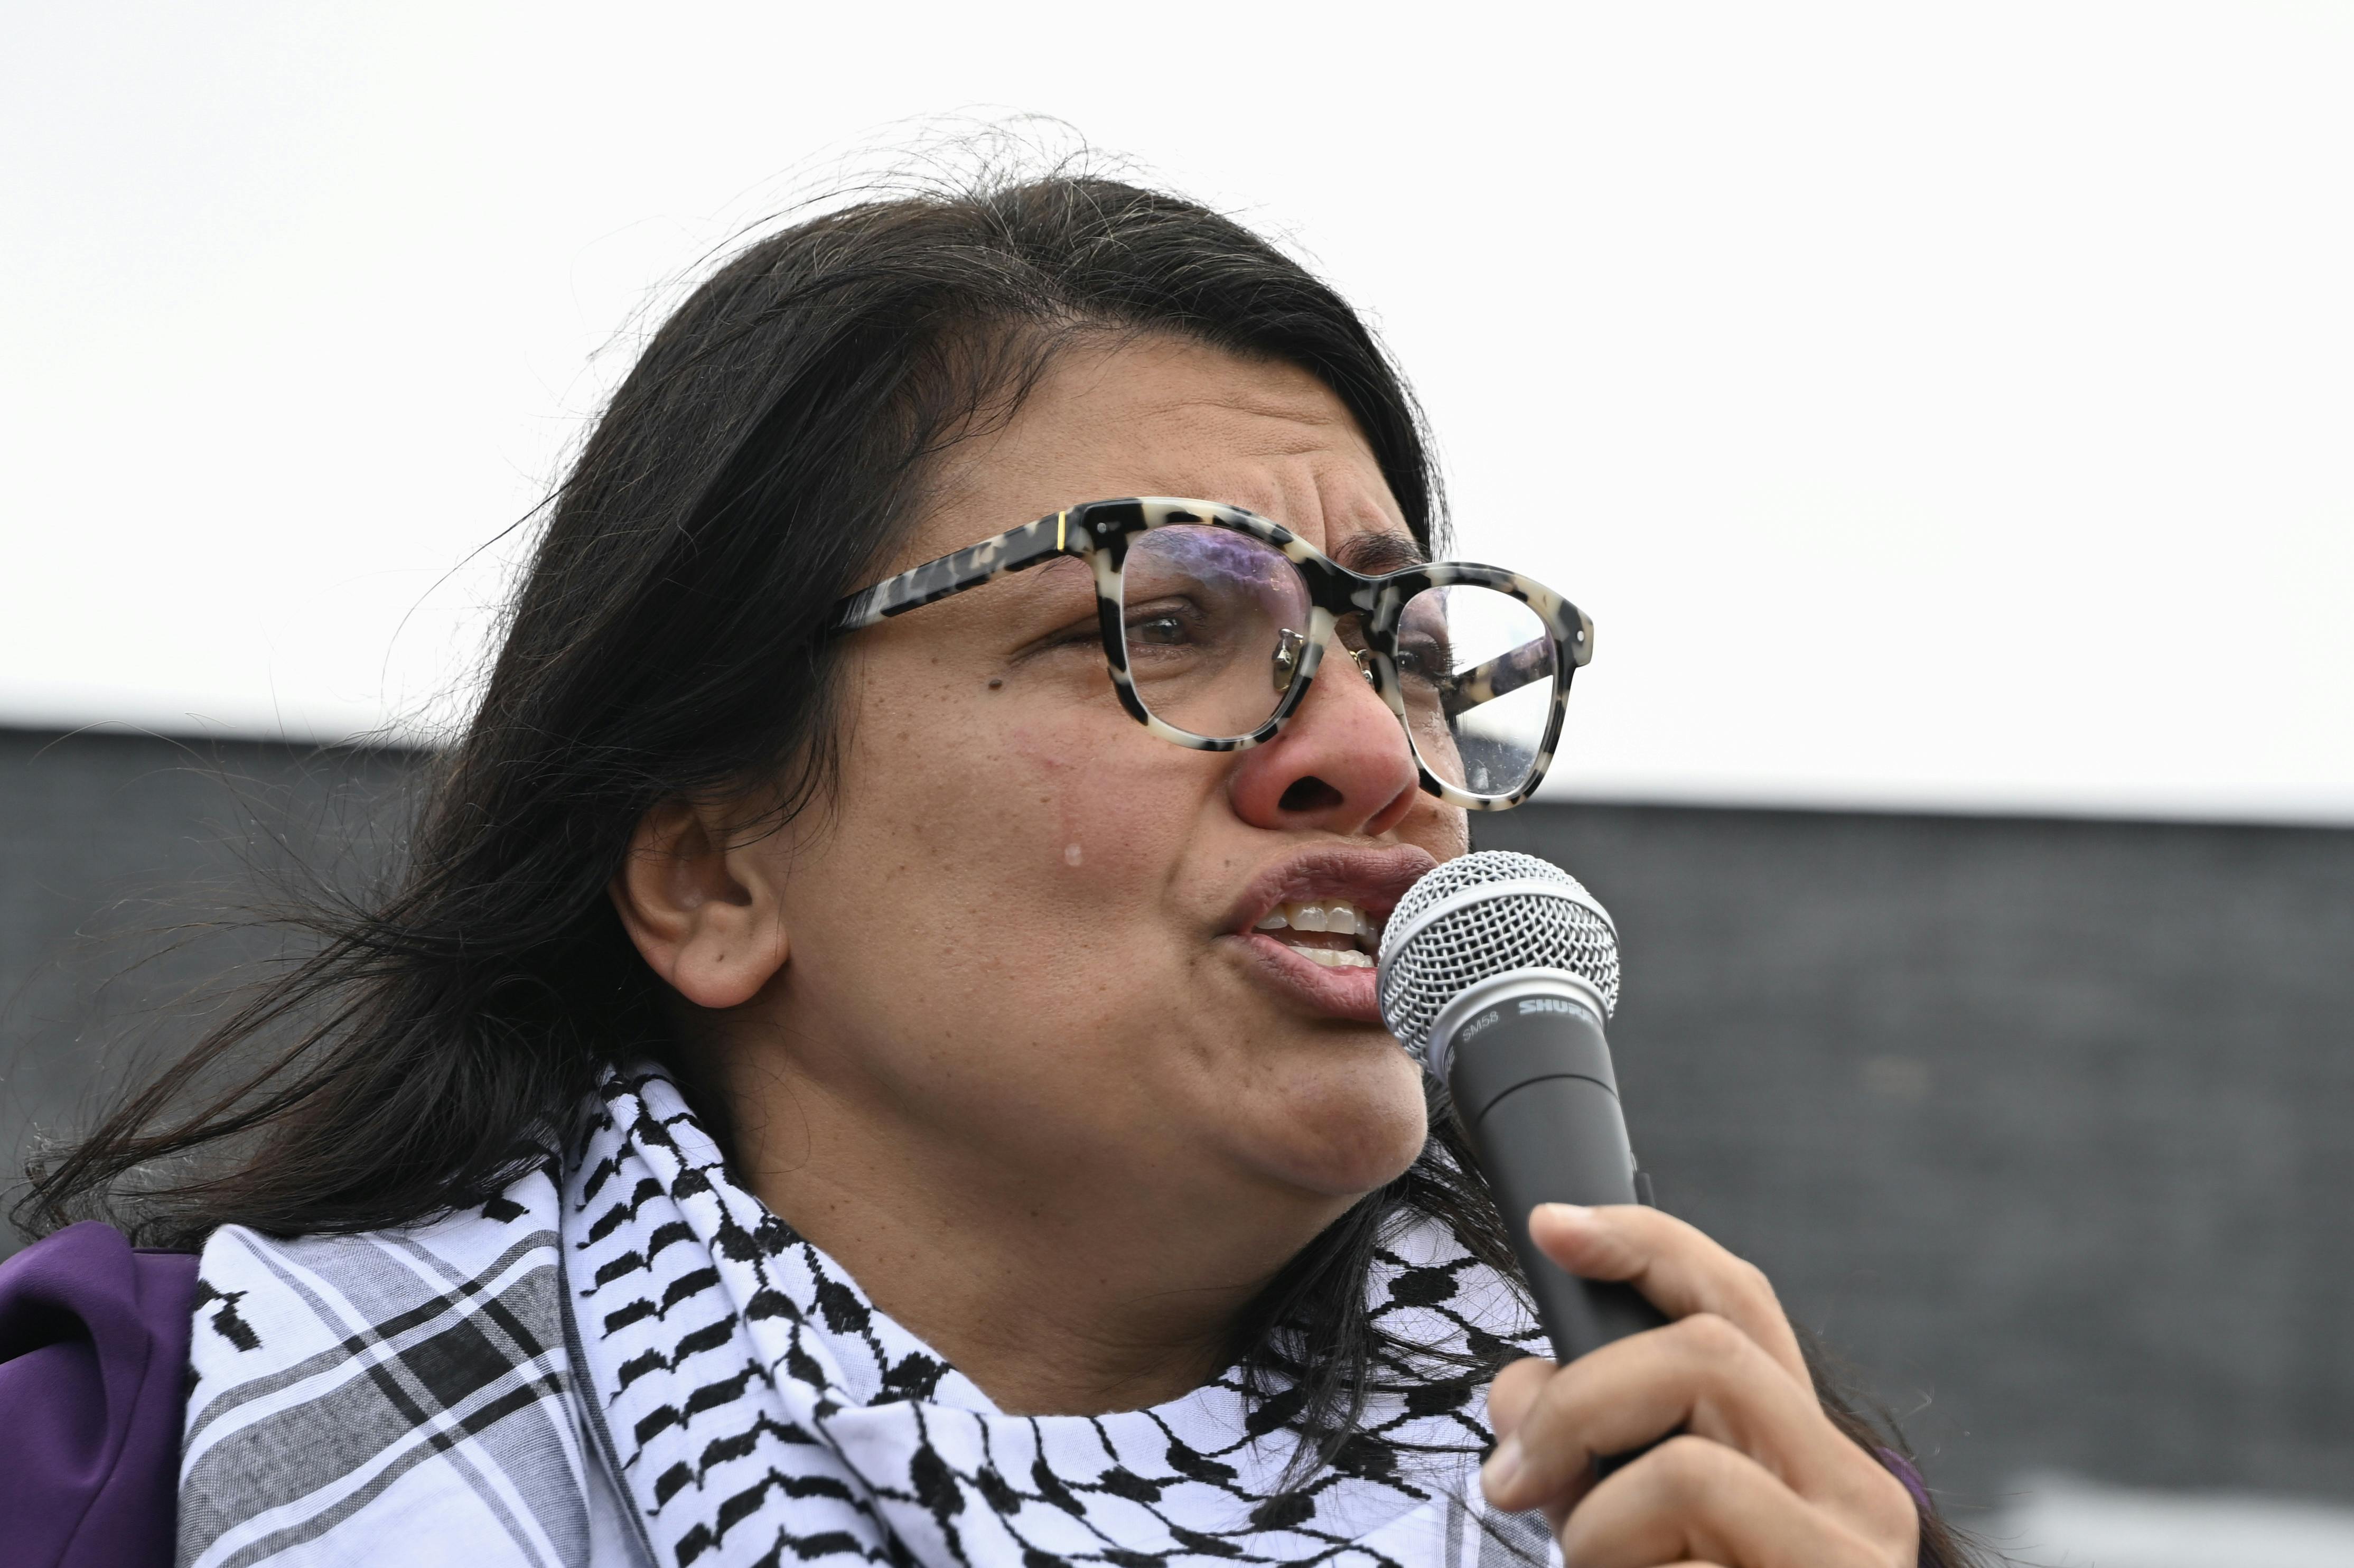 The House voted to censure Rep. Rashida Tlaib. What does that mean?